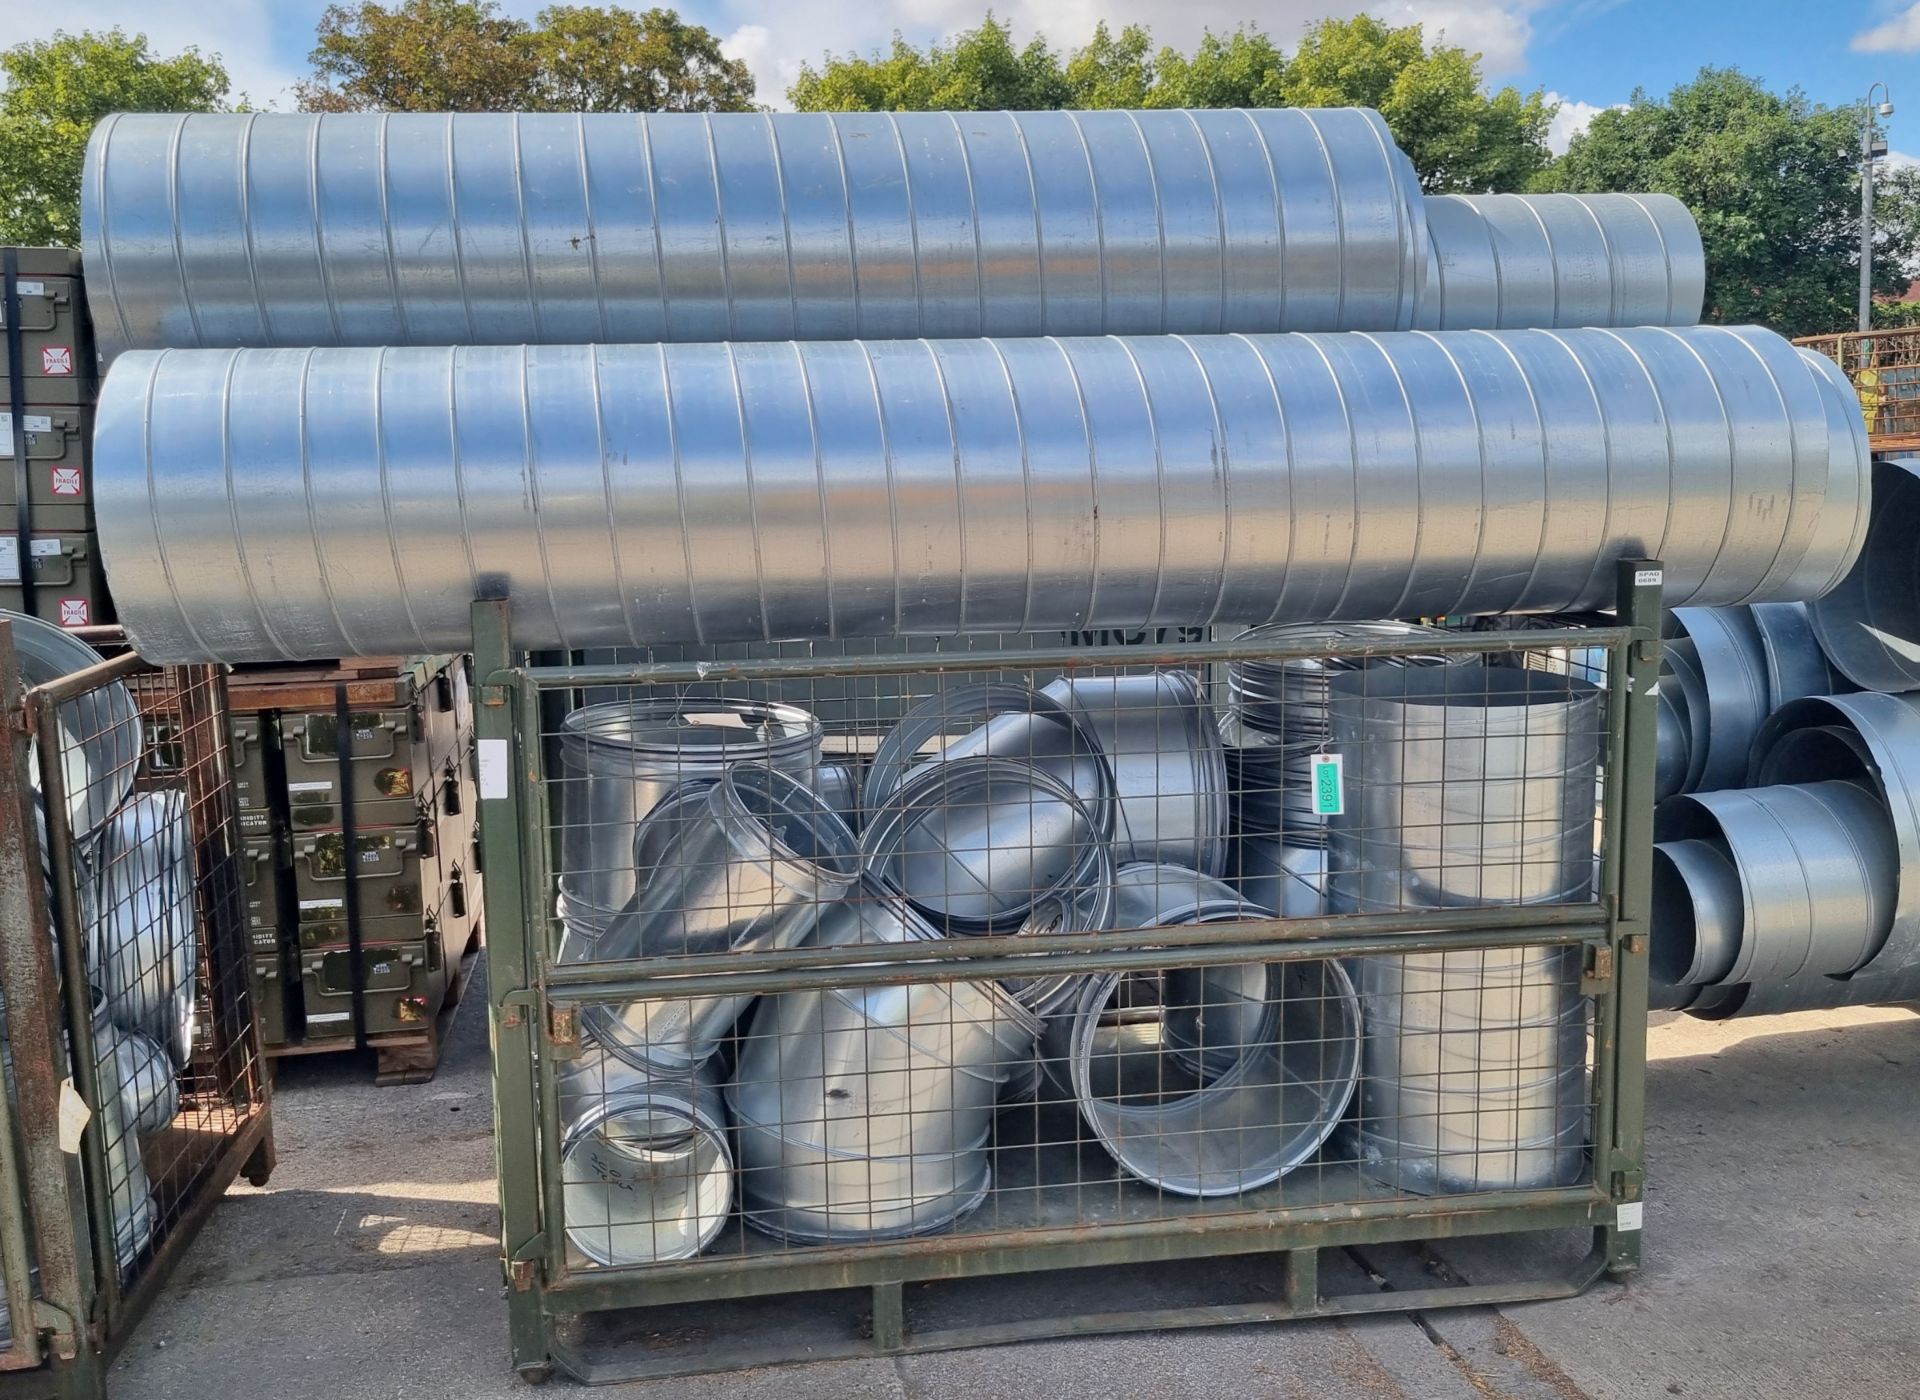 Ventilation Ducting and Elbows of Assorted Diameters and Lengths